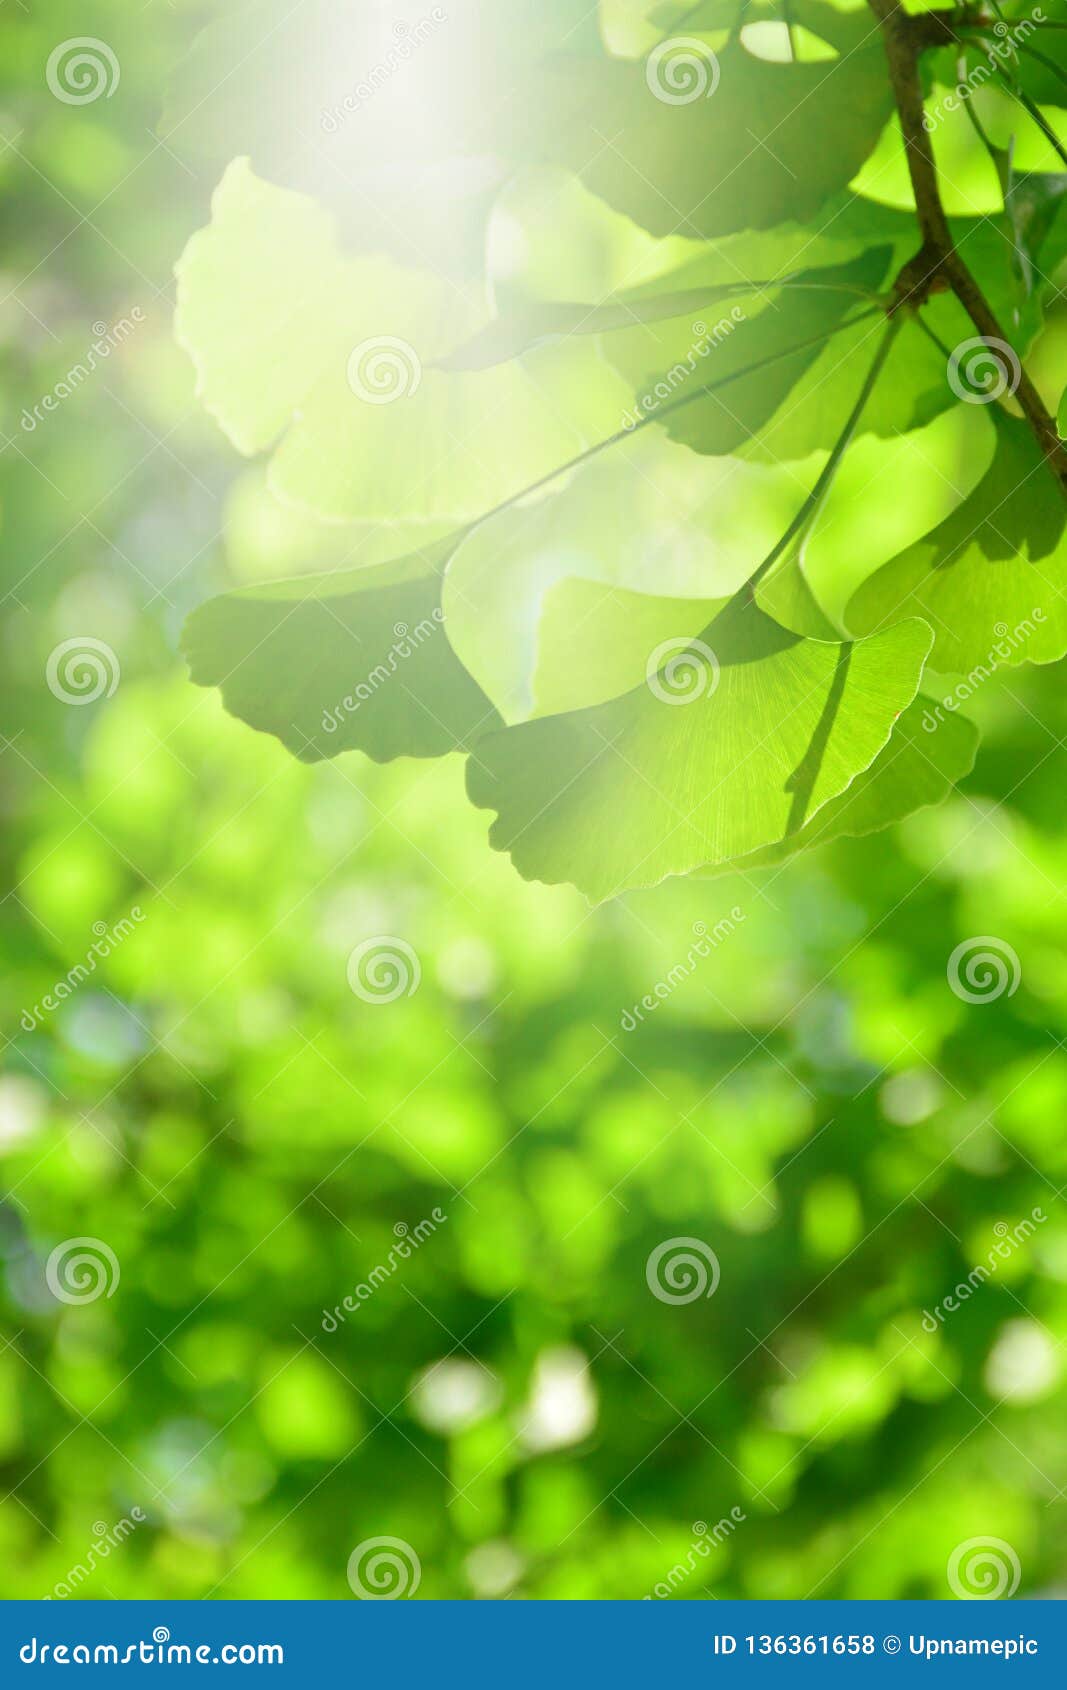 Blur Ginkgo Green Leaf Background. Stock Photo - Image of leaves, bokeh:  136361658